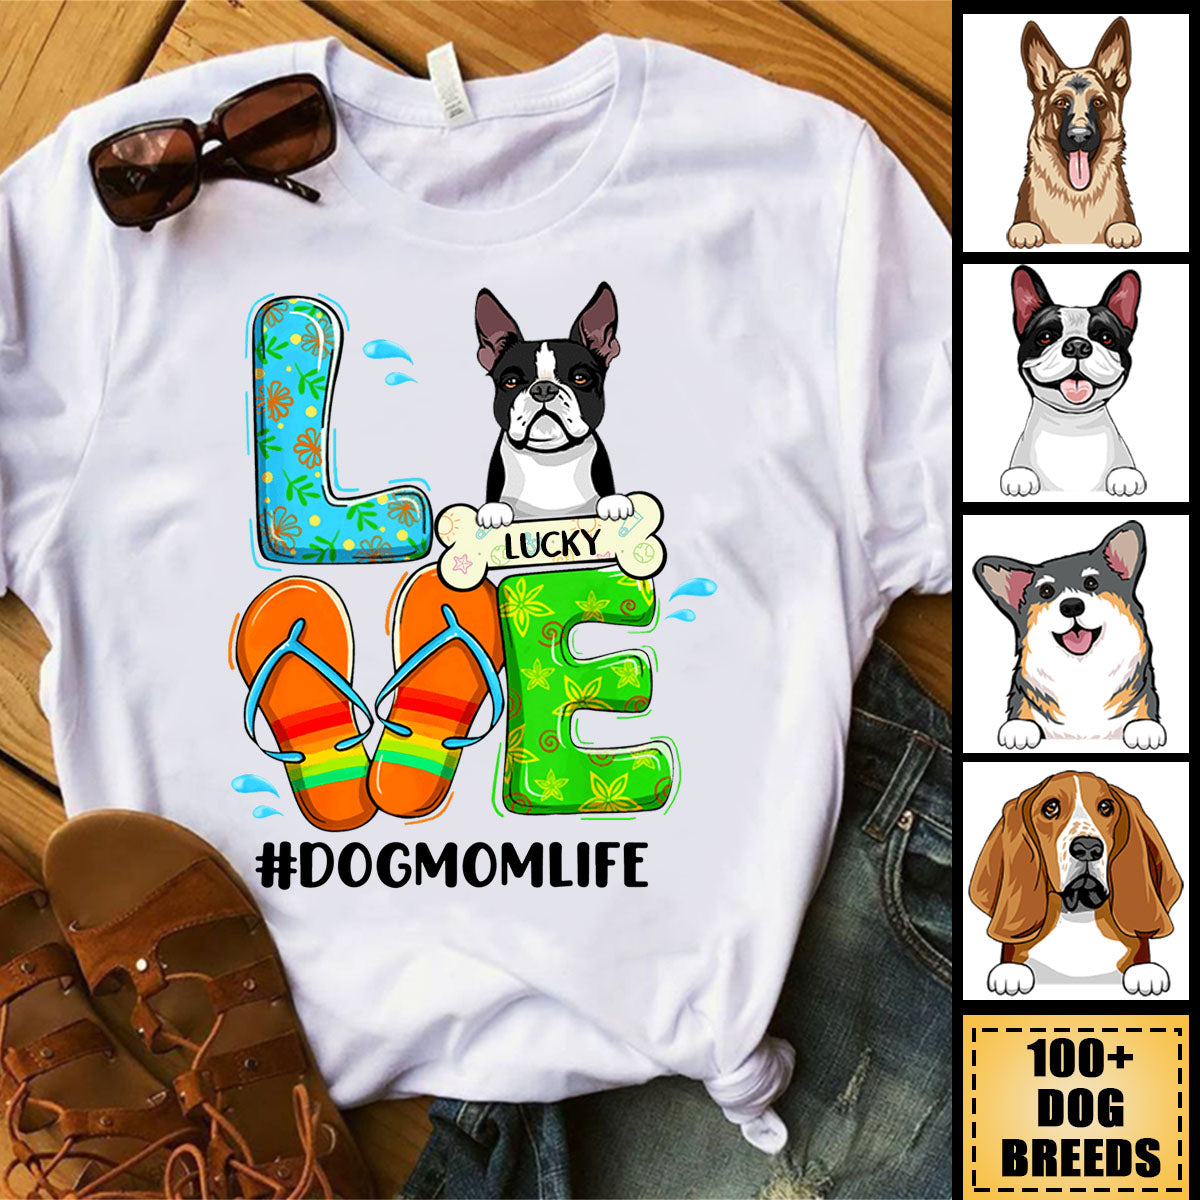 Dog Mom Beach - Personalized Apparel - Gift For Dog Lovers, Summer Vacation